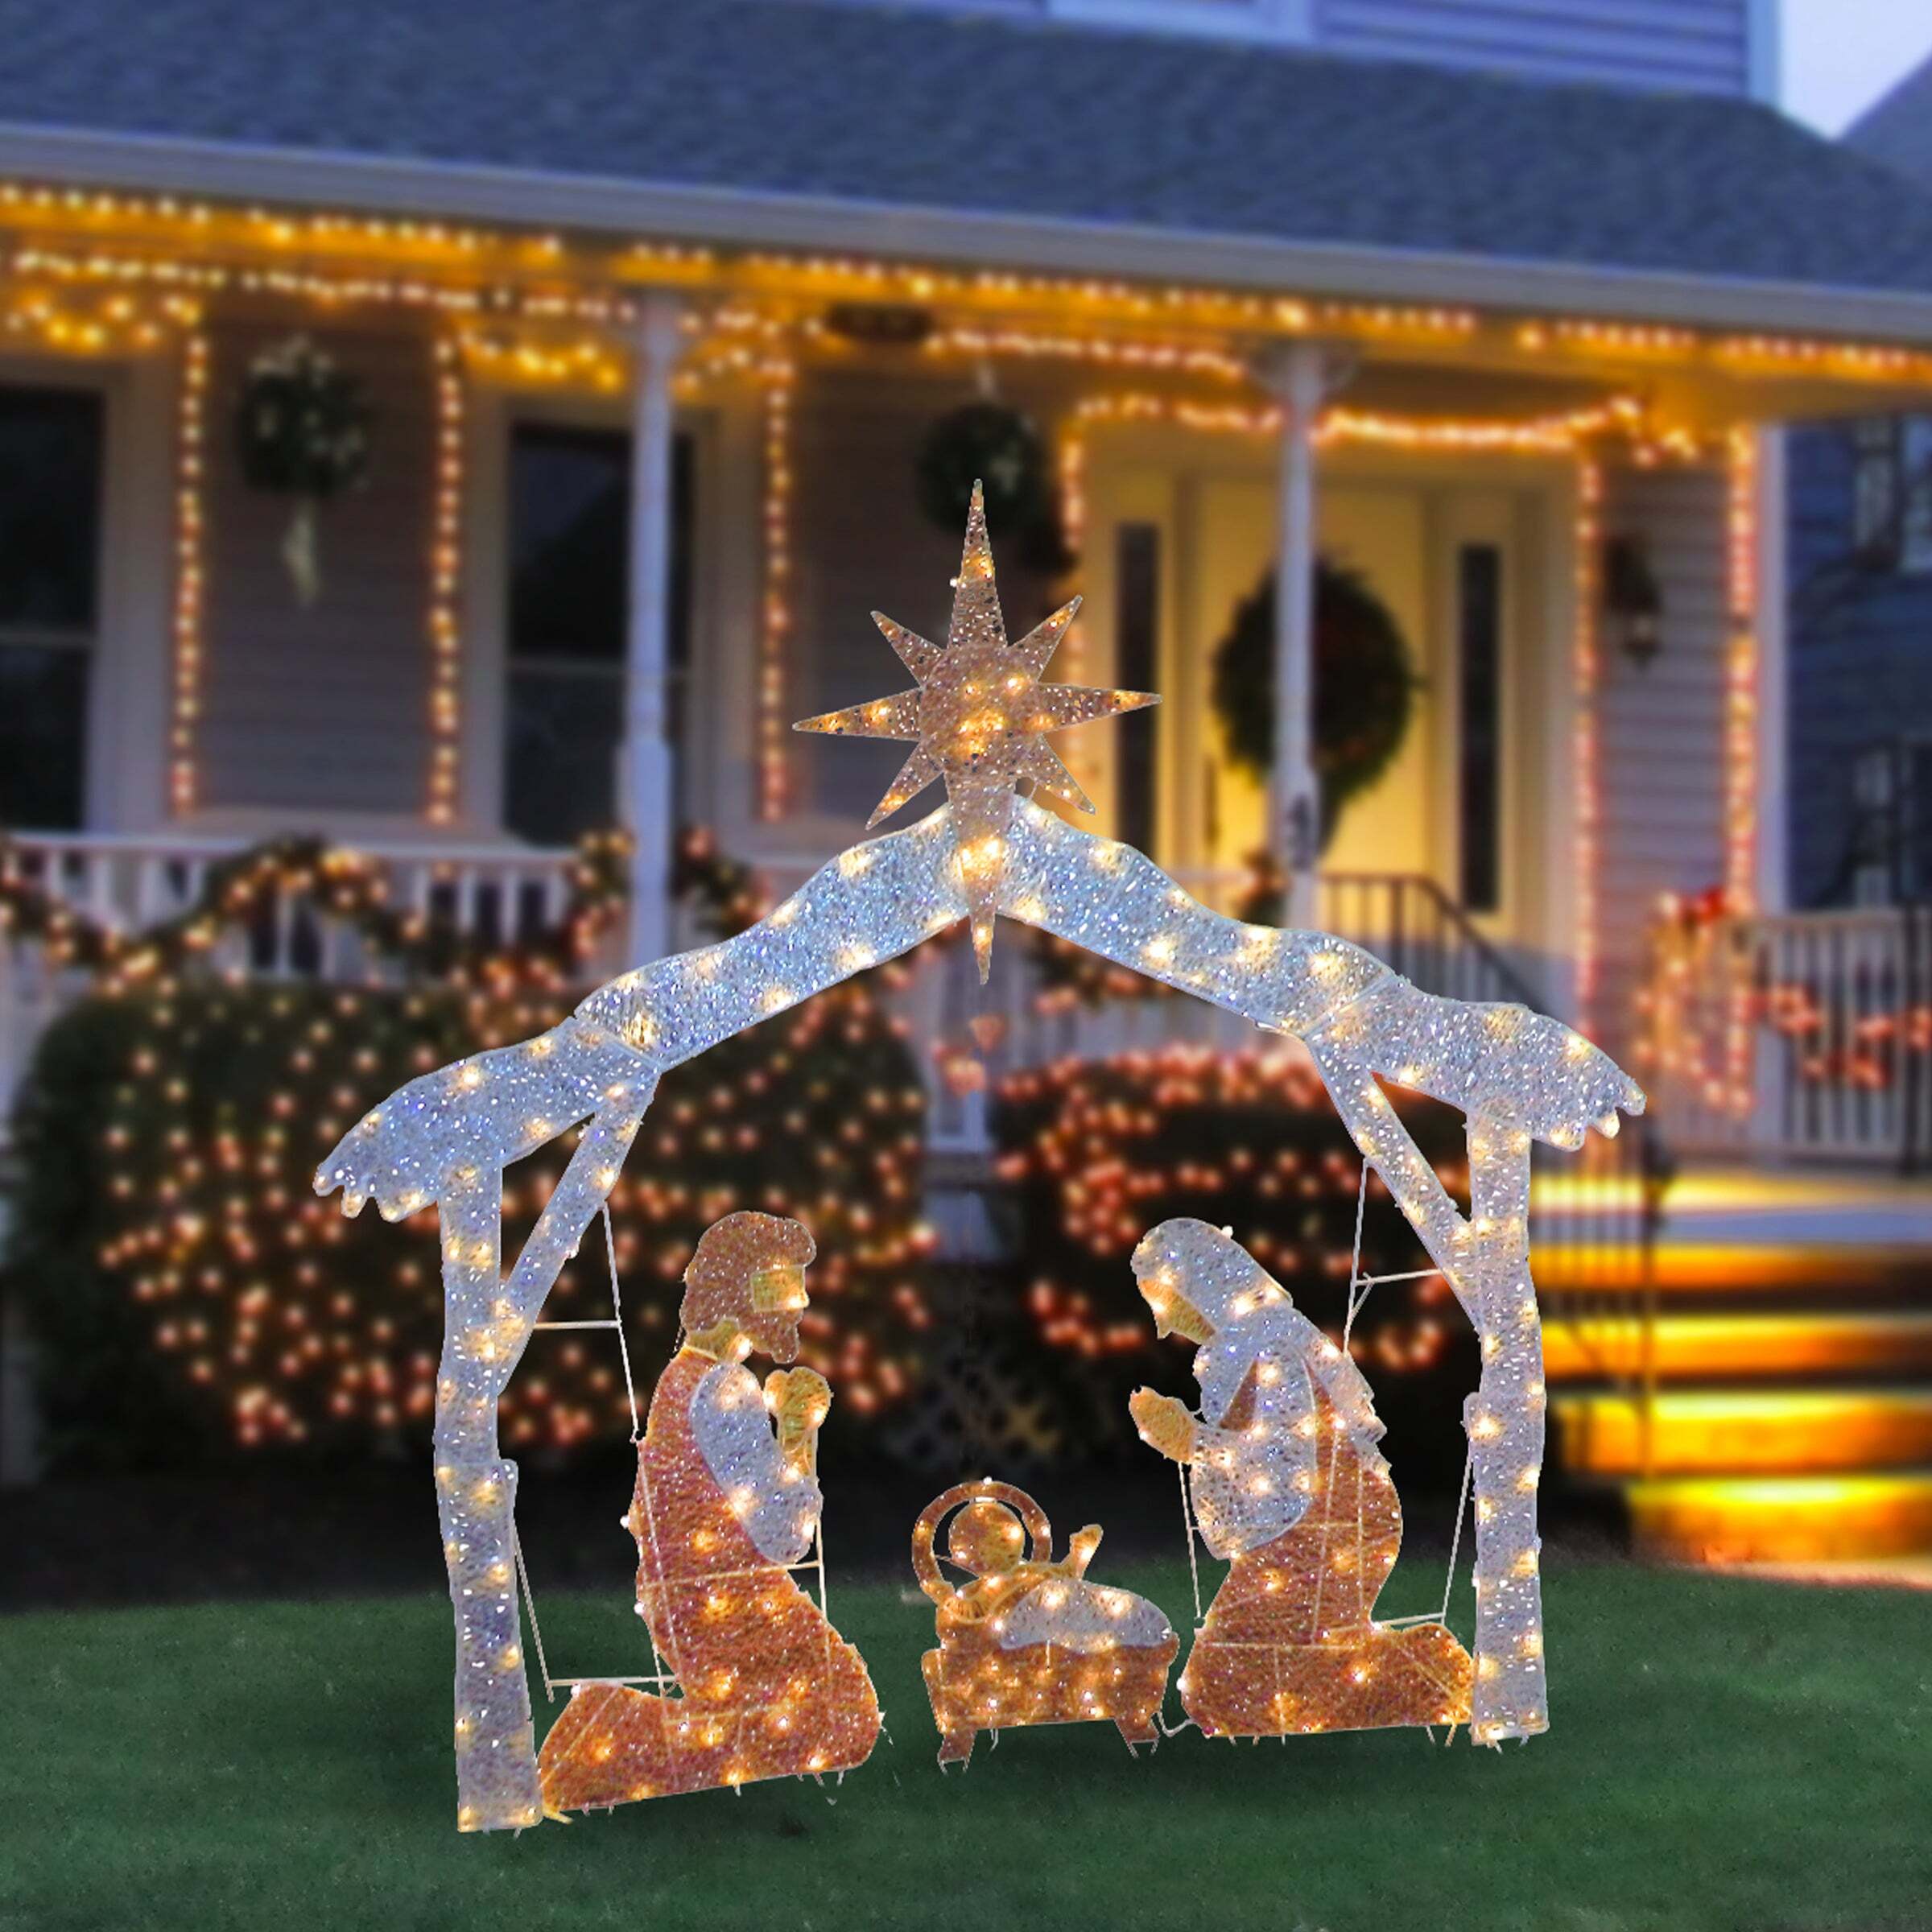 72in. Nativity Scene with White LED Lights